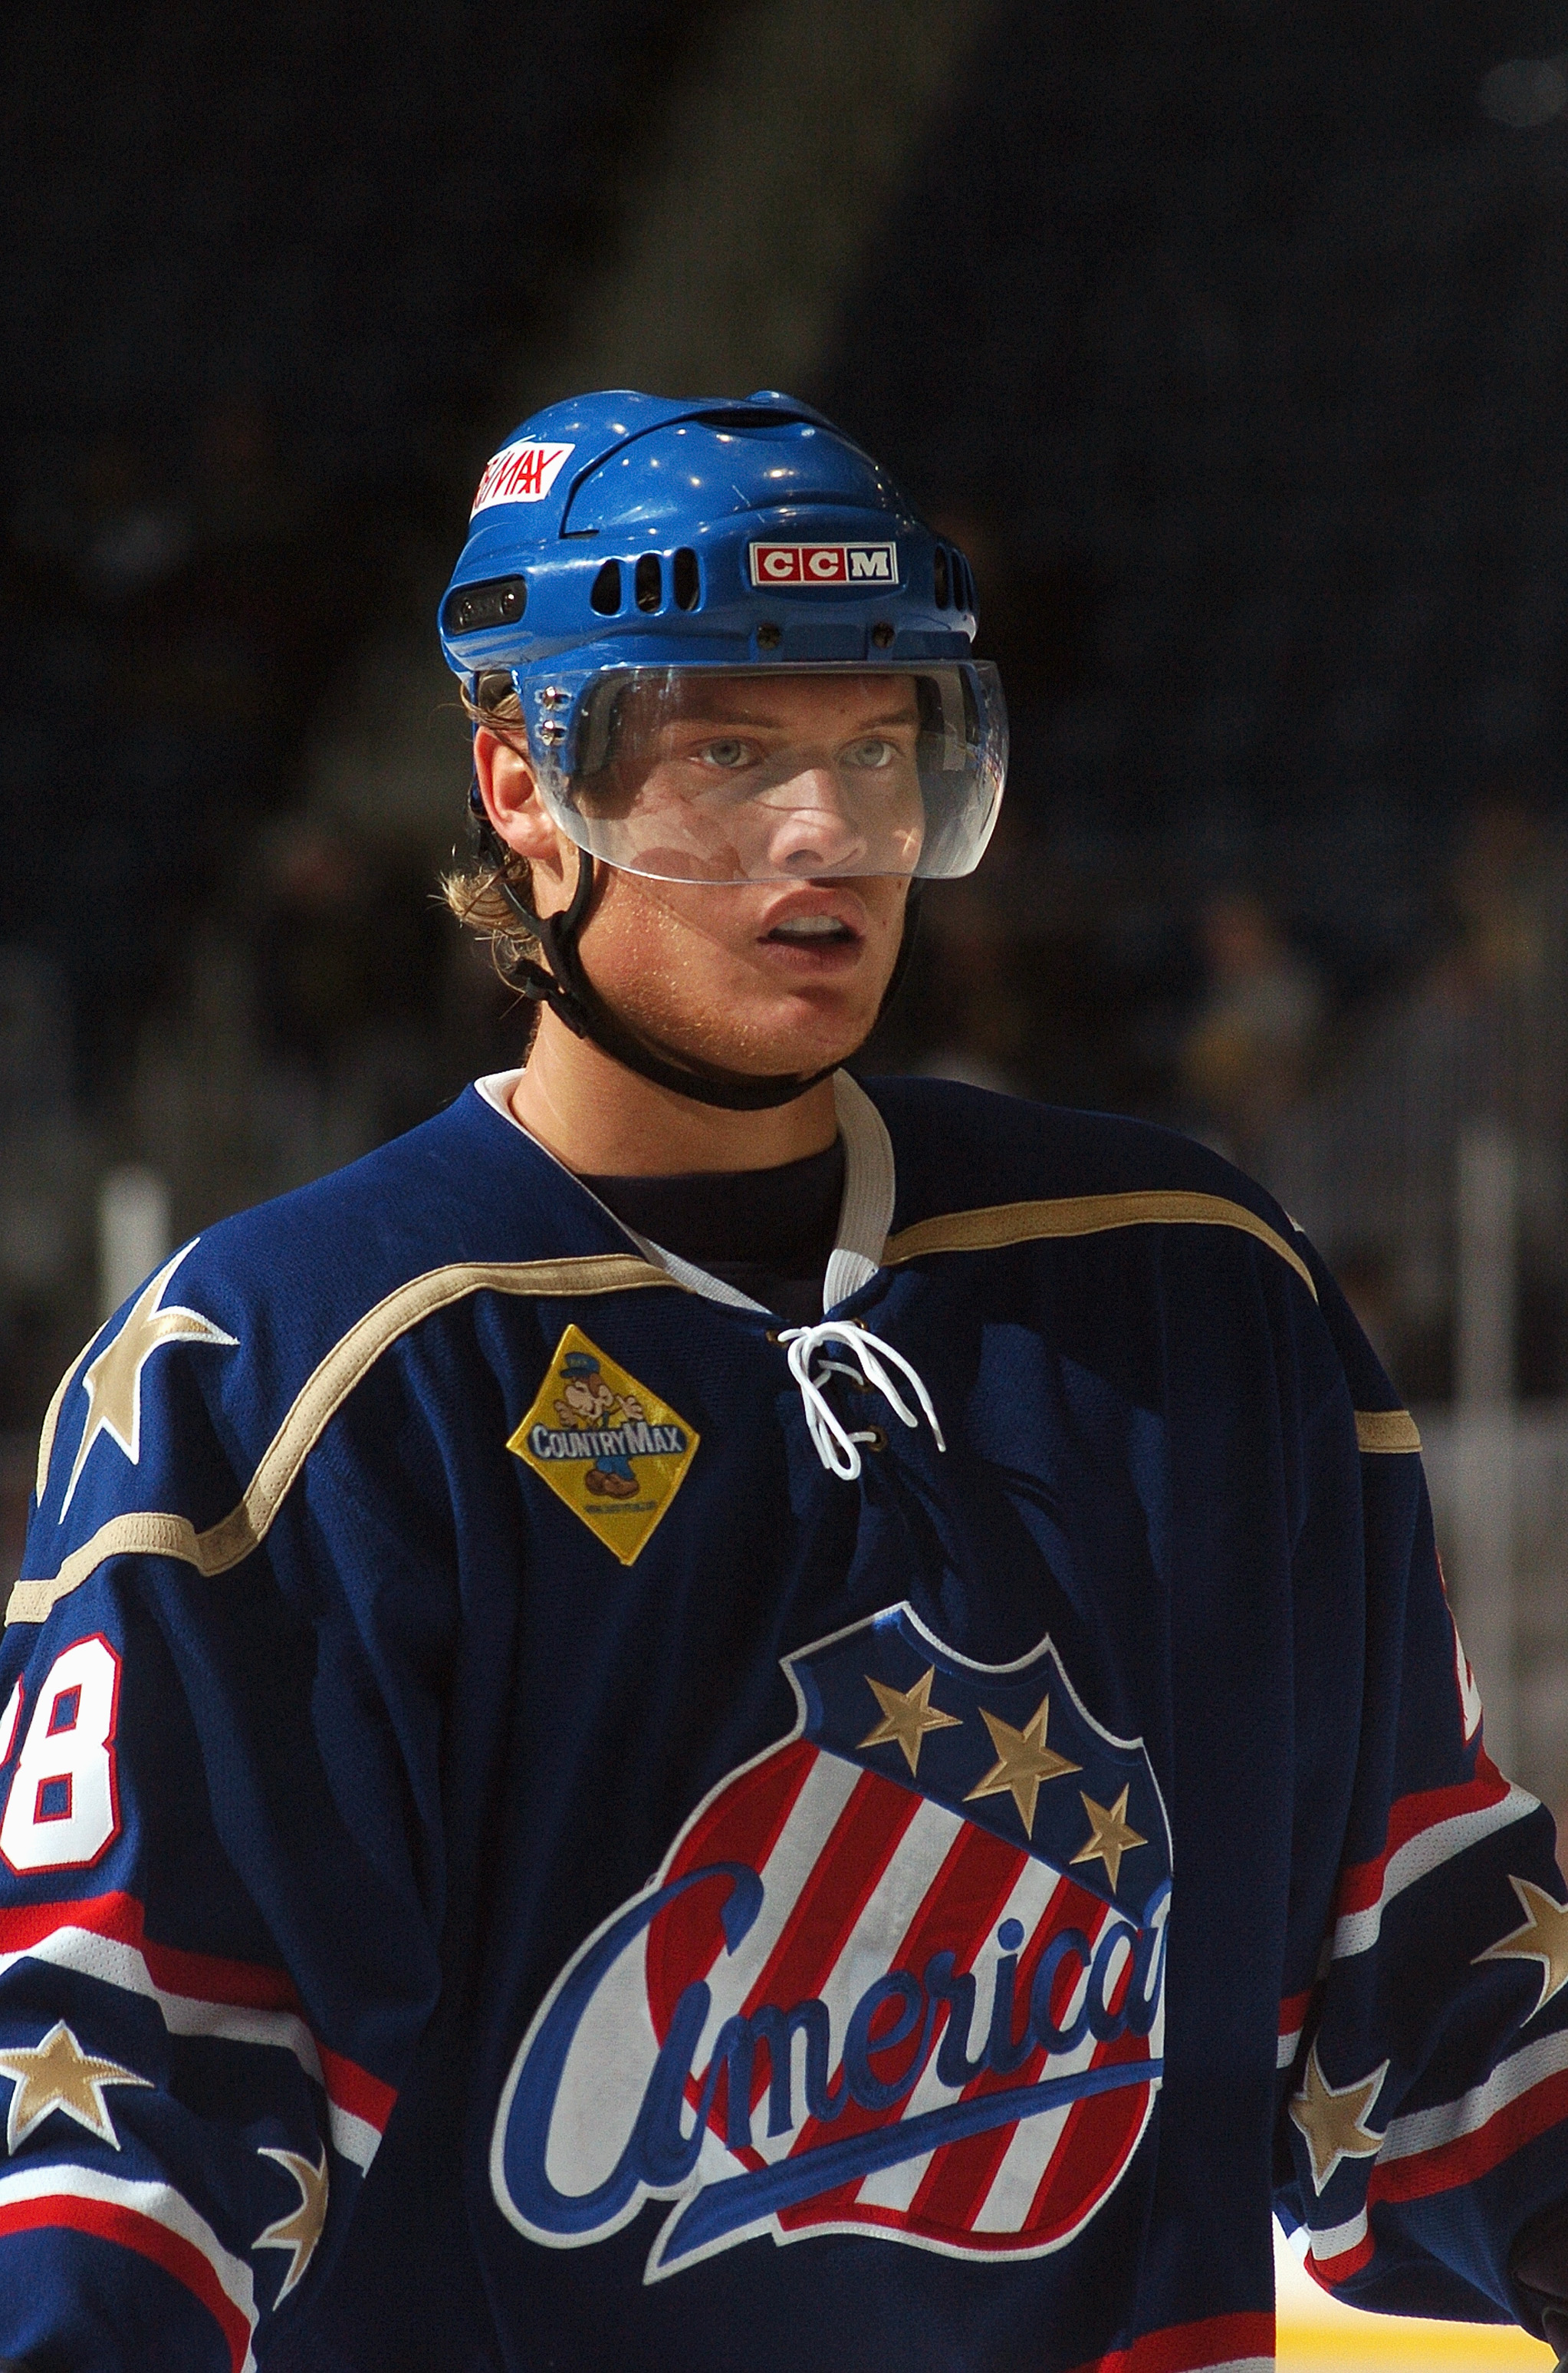 The Best and Worst of AHL Jerseys: Part 1 – Admirals Roundtable